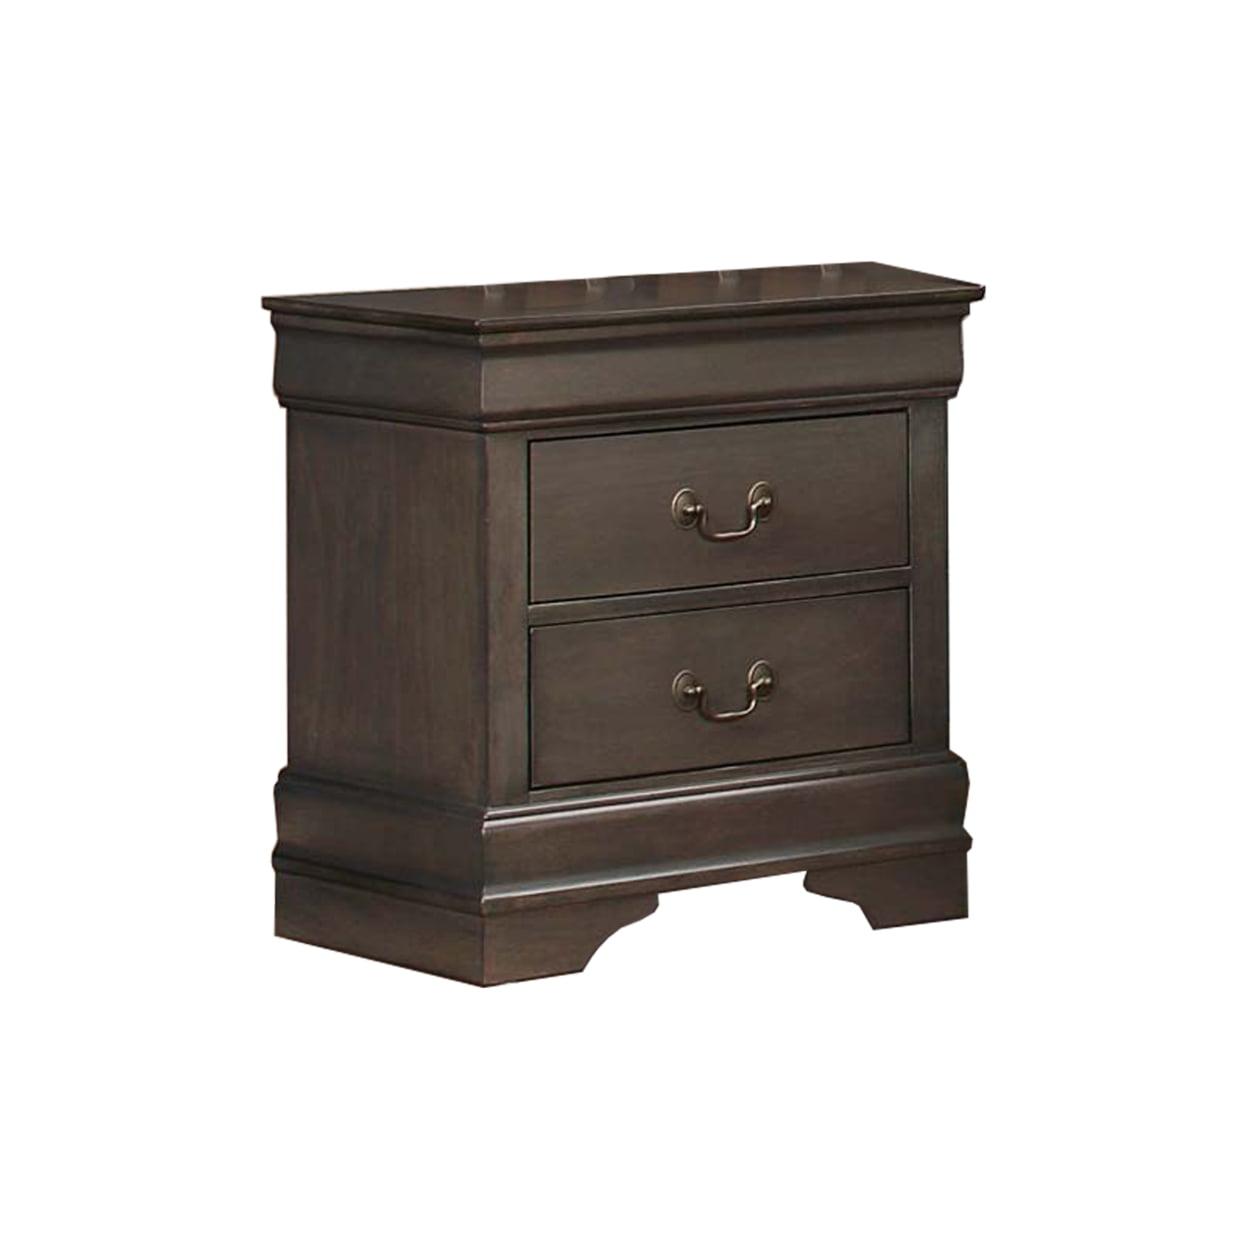 Elegant Mayville 2-Drawer Nightstand in Stained Gray, Traditional Design